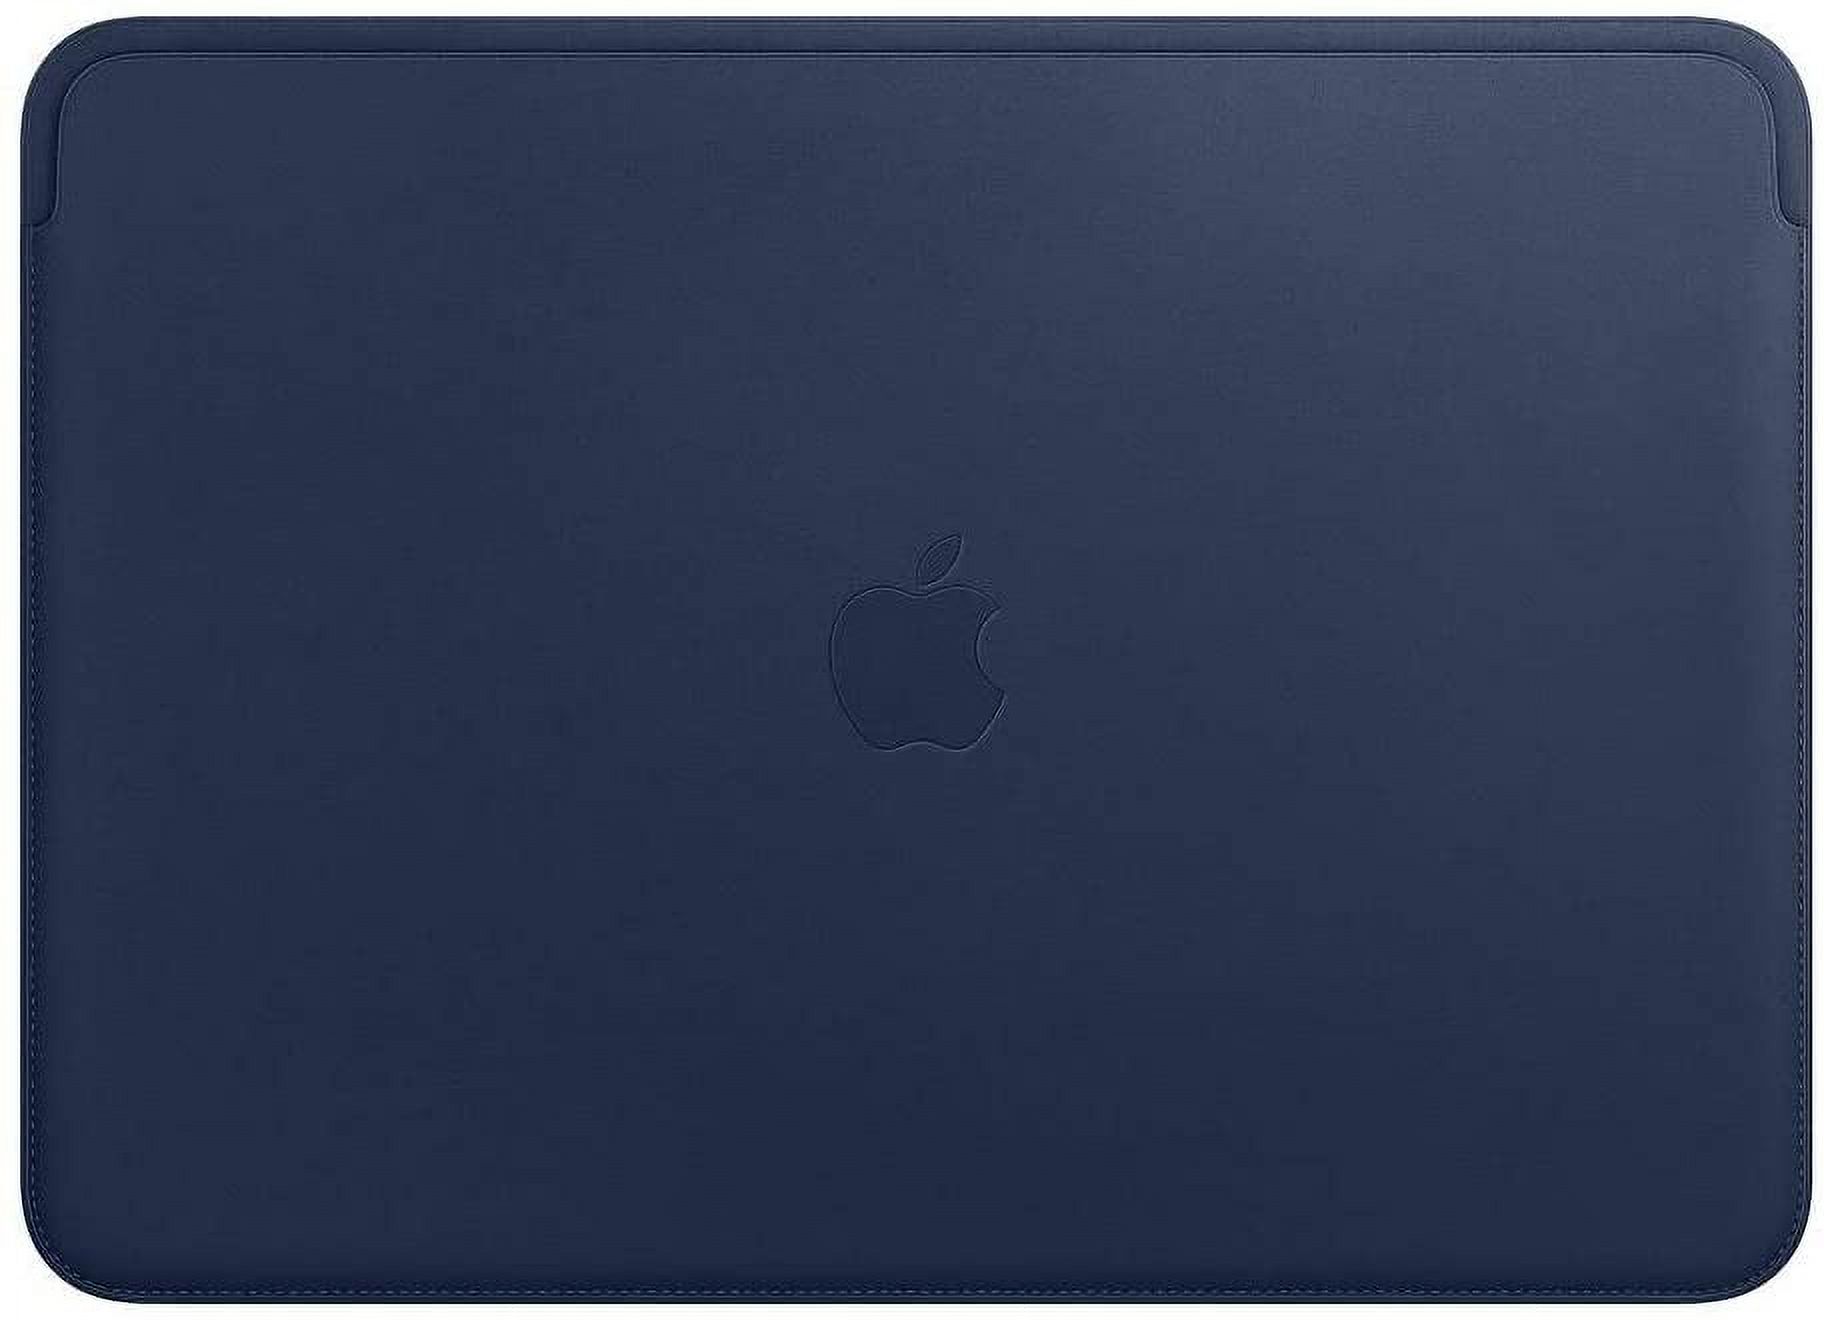 MacbookPro 13 Leather Sleeve - Midnight Blue for 13-inch MacBookAir and MacBookPro MRQL2ZM/A - image 1 of 3